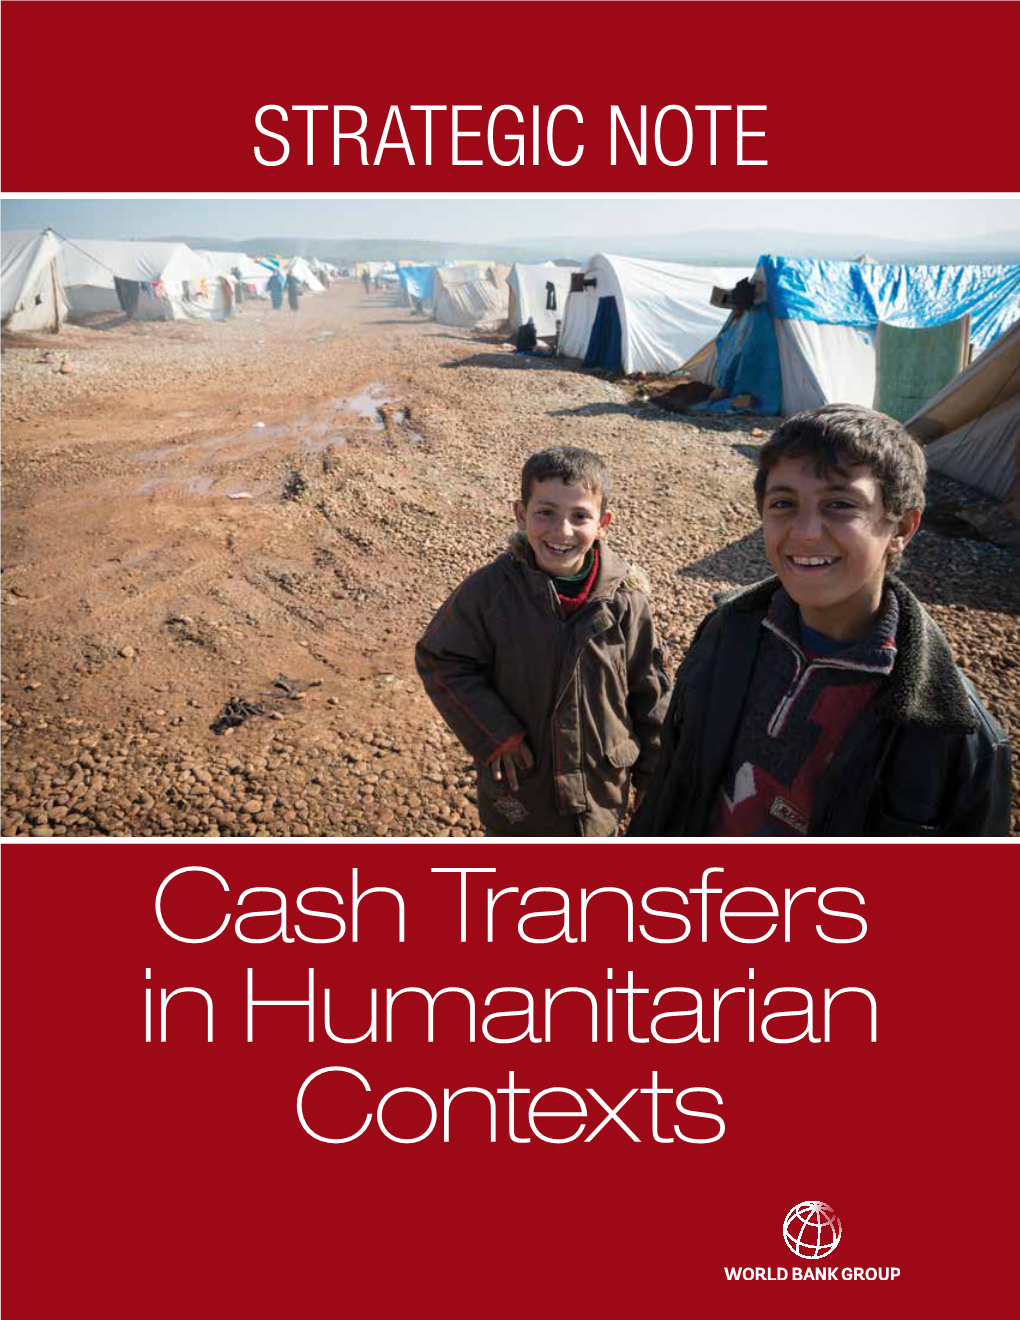 Strategic Note: Cash Transfers in Humanitarian Contexts Provide Assistance